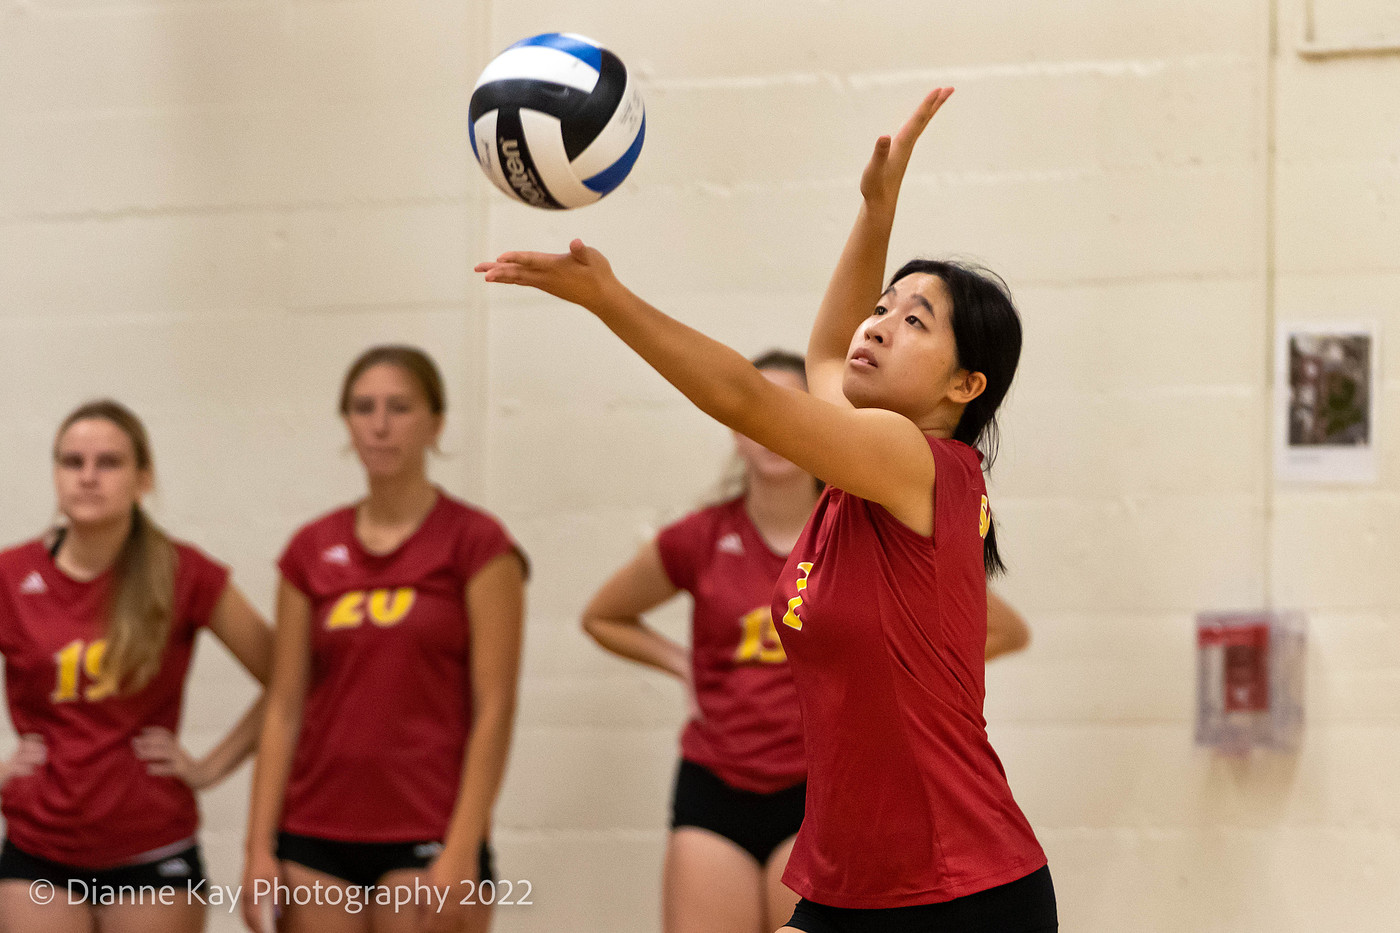 The Panthers 10-game winning streak is snapped; De Anza wins 3-1 (23-25, 25-18, 25-23, 25-15) at the Shasta Classic